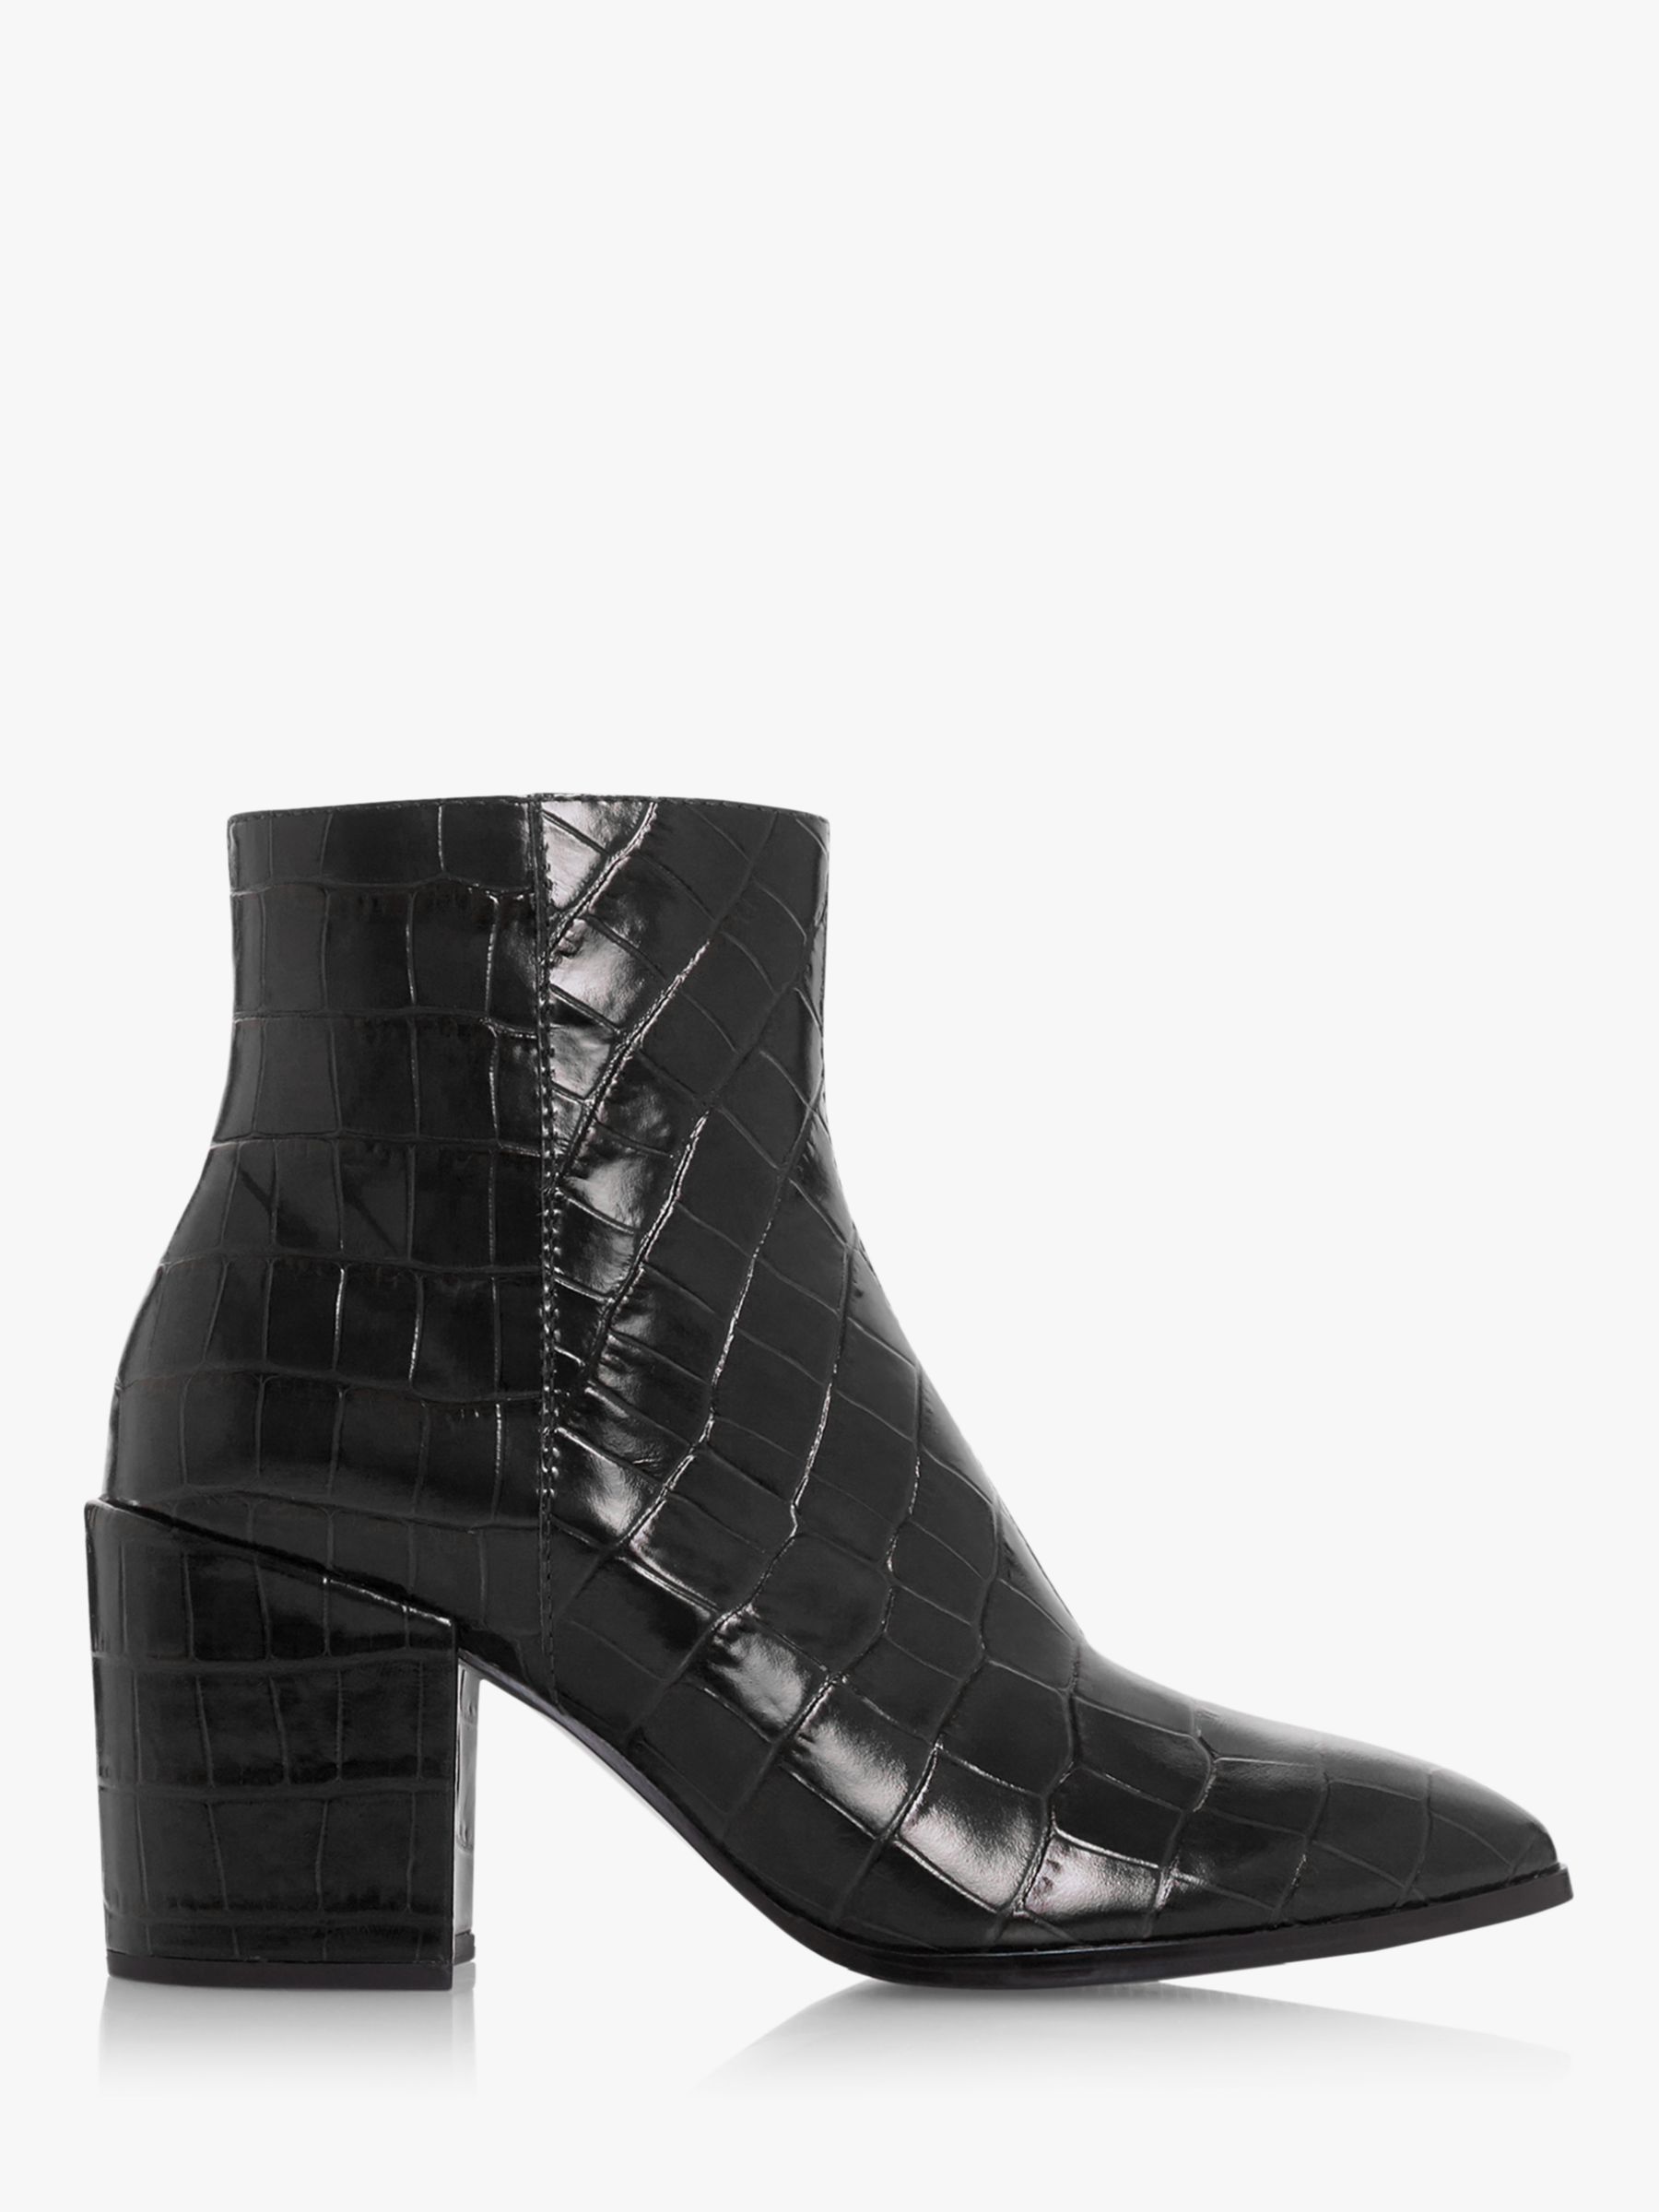 Dune Croc-Effect Pointed Toe Leather Ankle Boots, Black